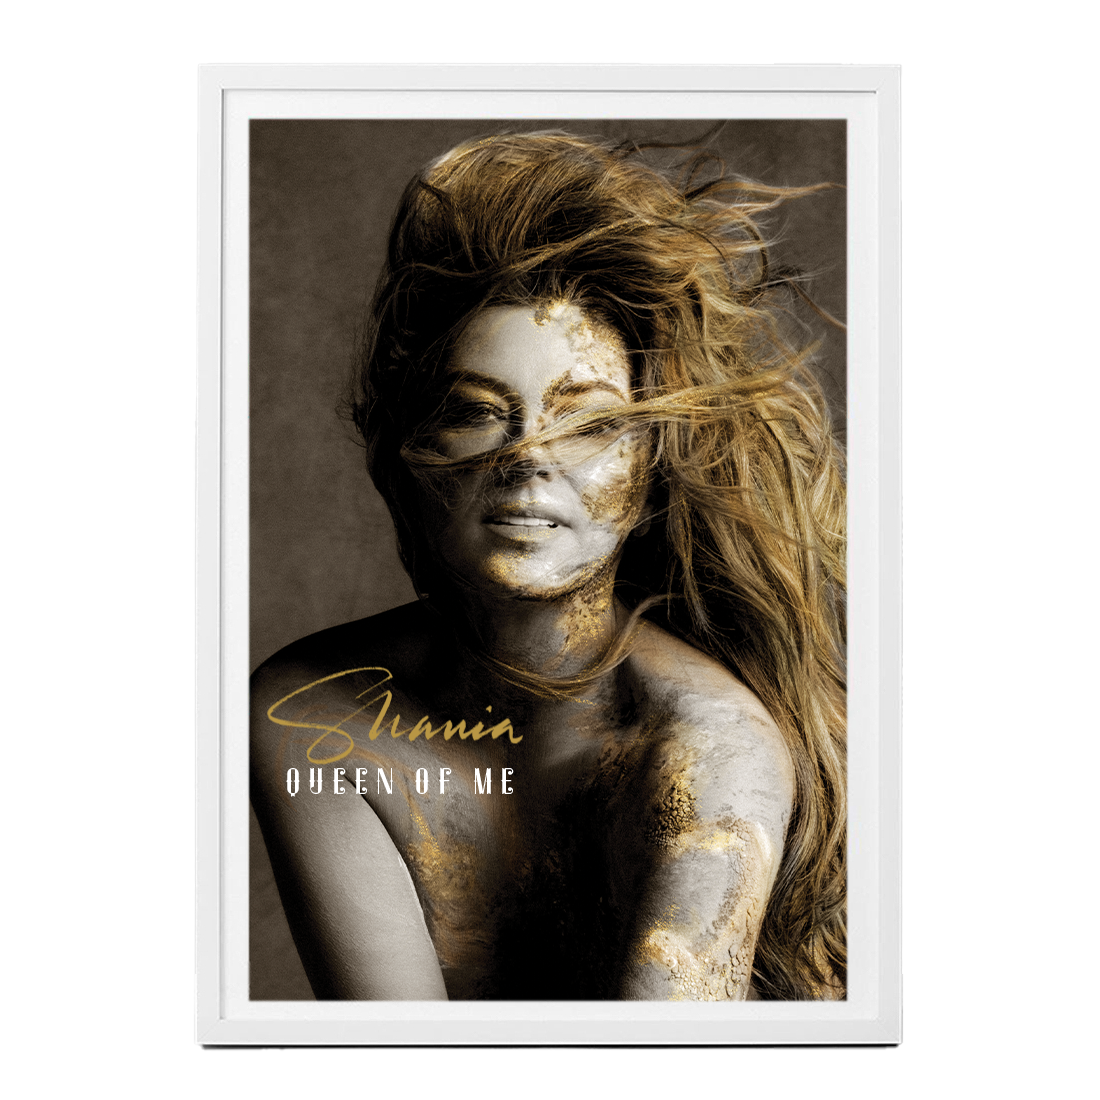 Shania Twain - Queen of Me Poster